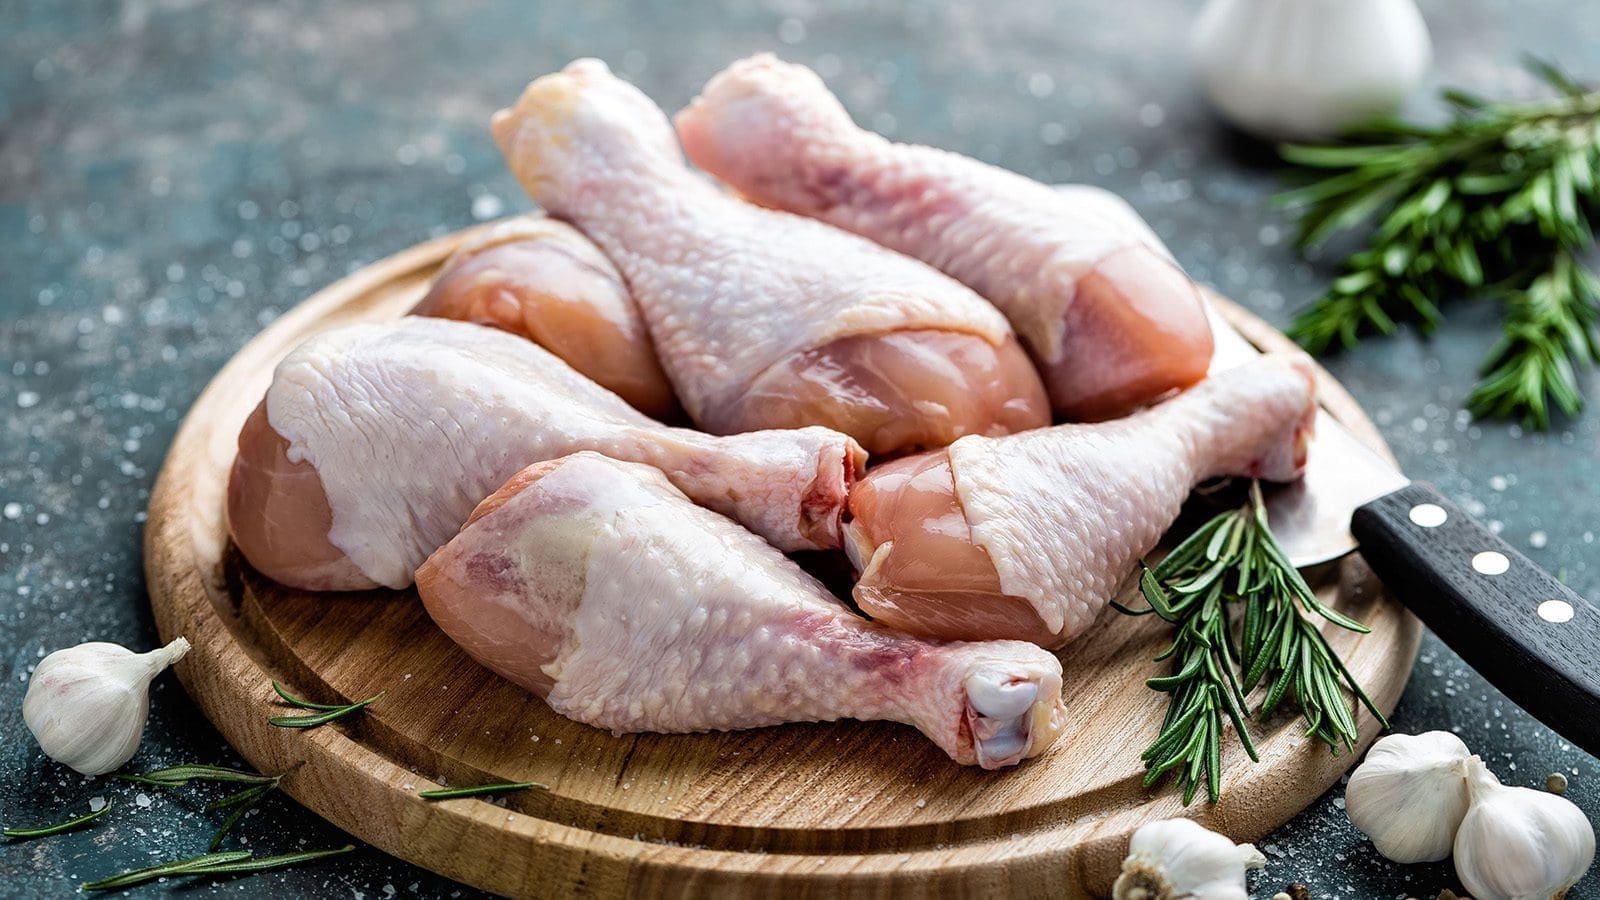 Angola’s poultry production expected to rise by 17% in 2023 on improved economic environment